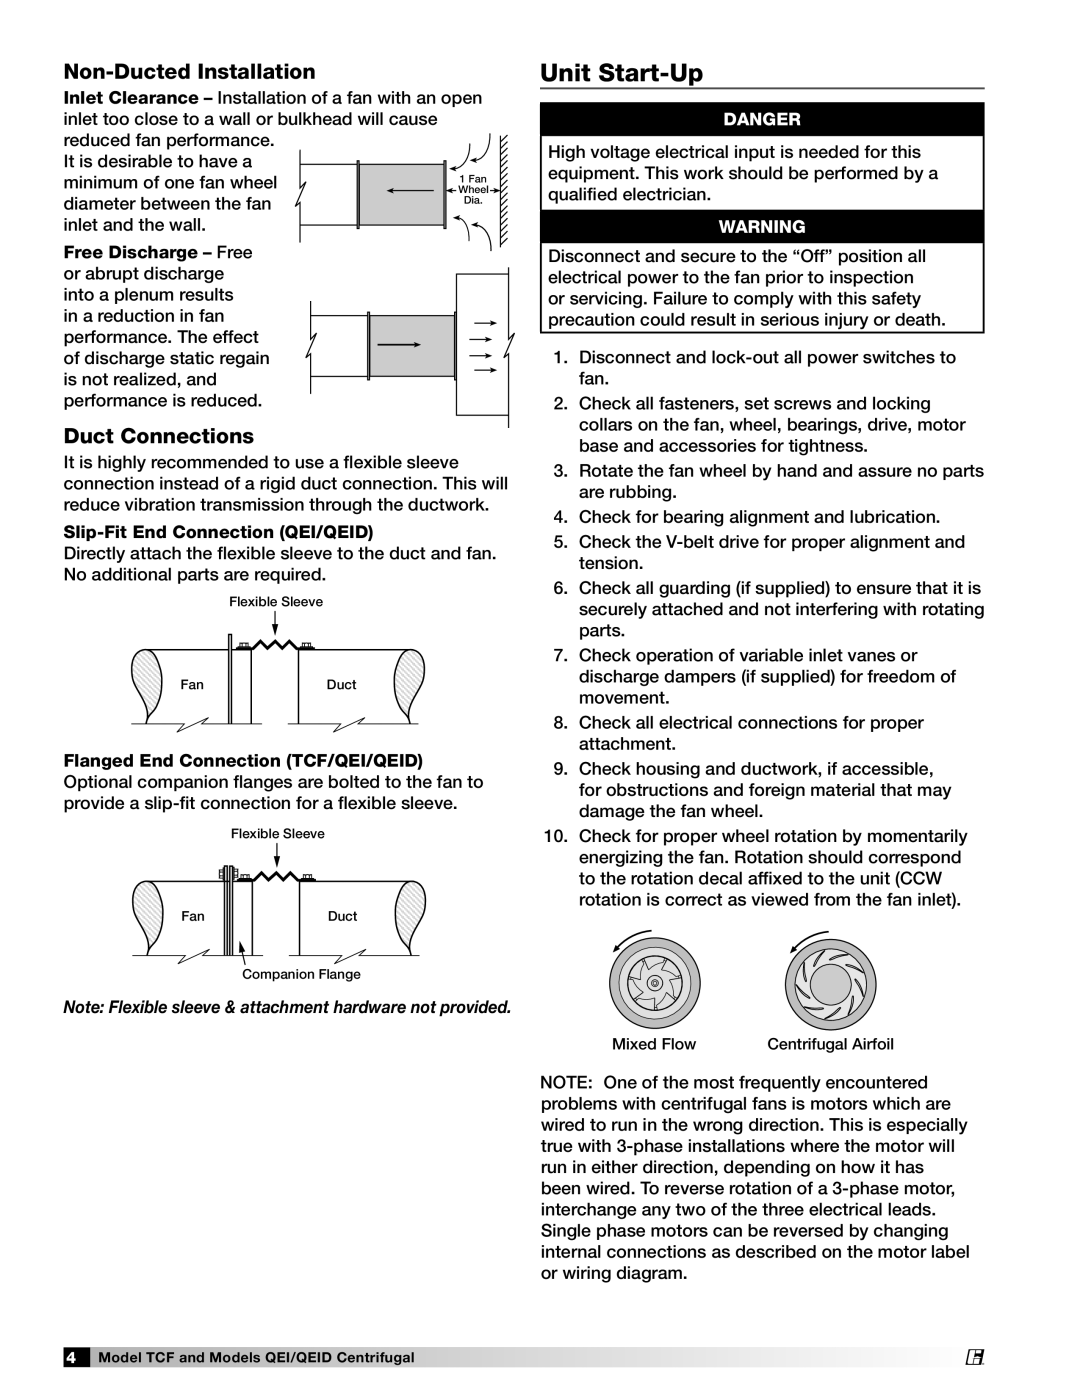 Greenheck Fan 459968 manual Unit Start-Up, Non-DuctedInstallation, Duct Connections, Danger 